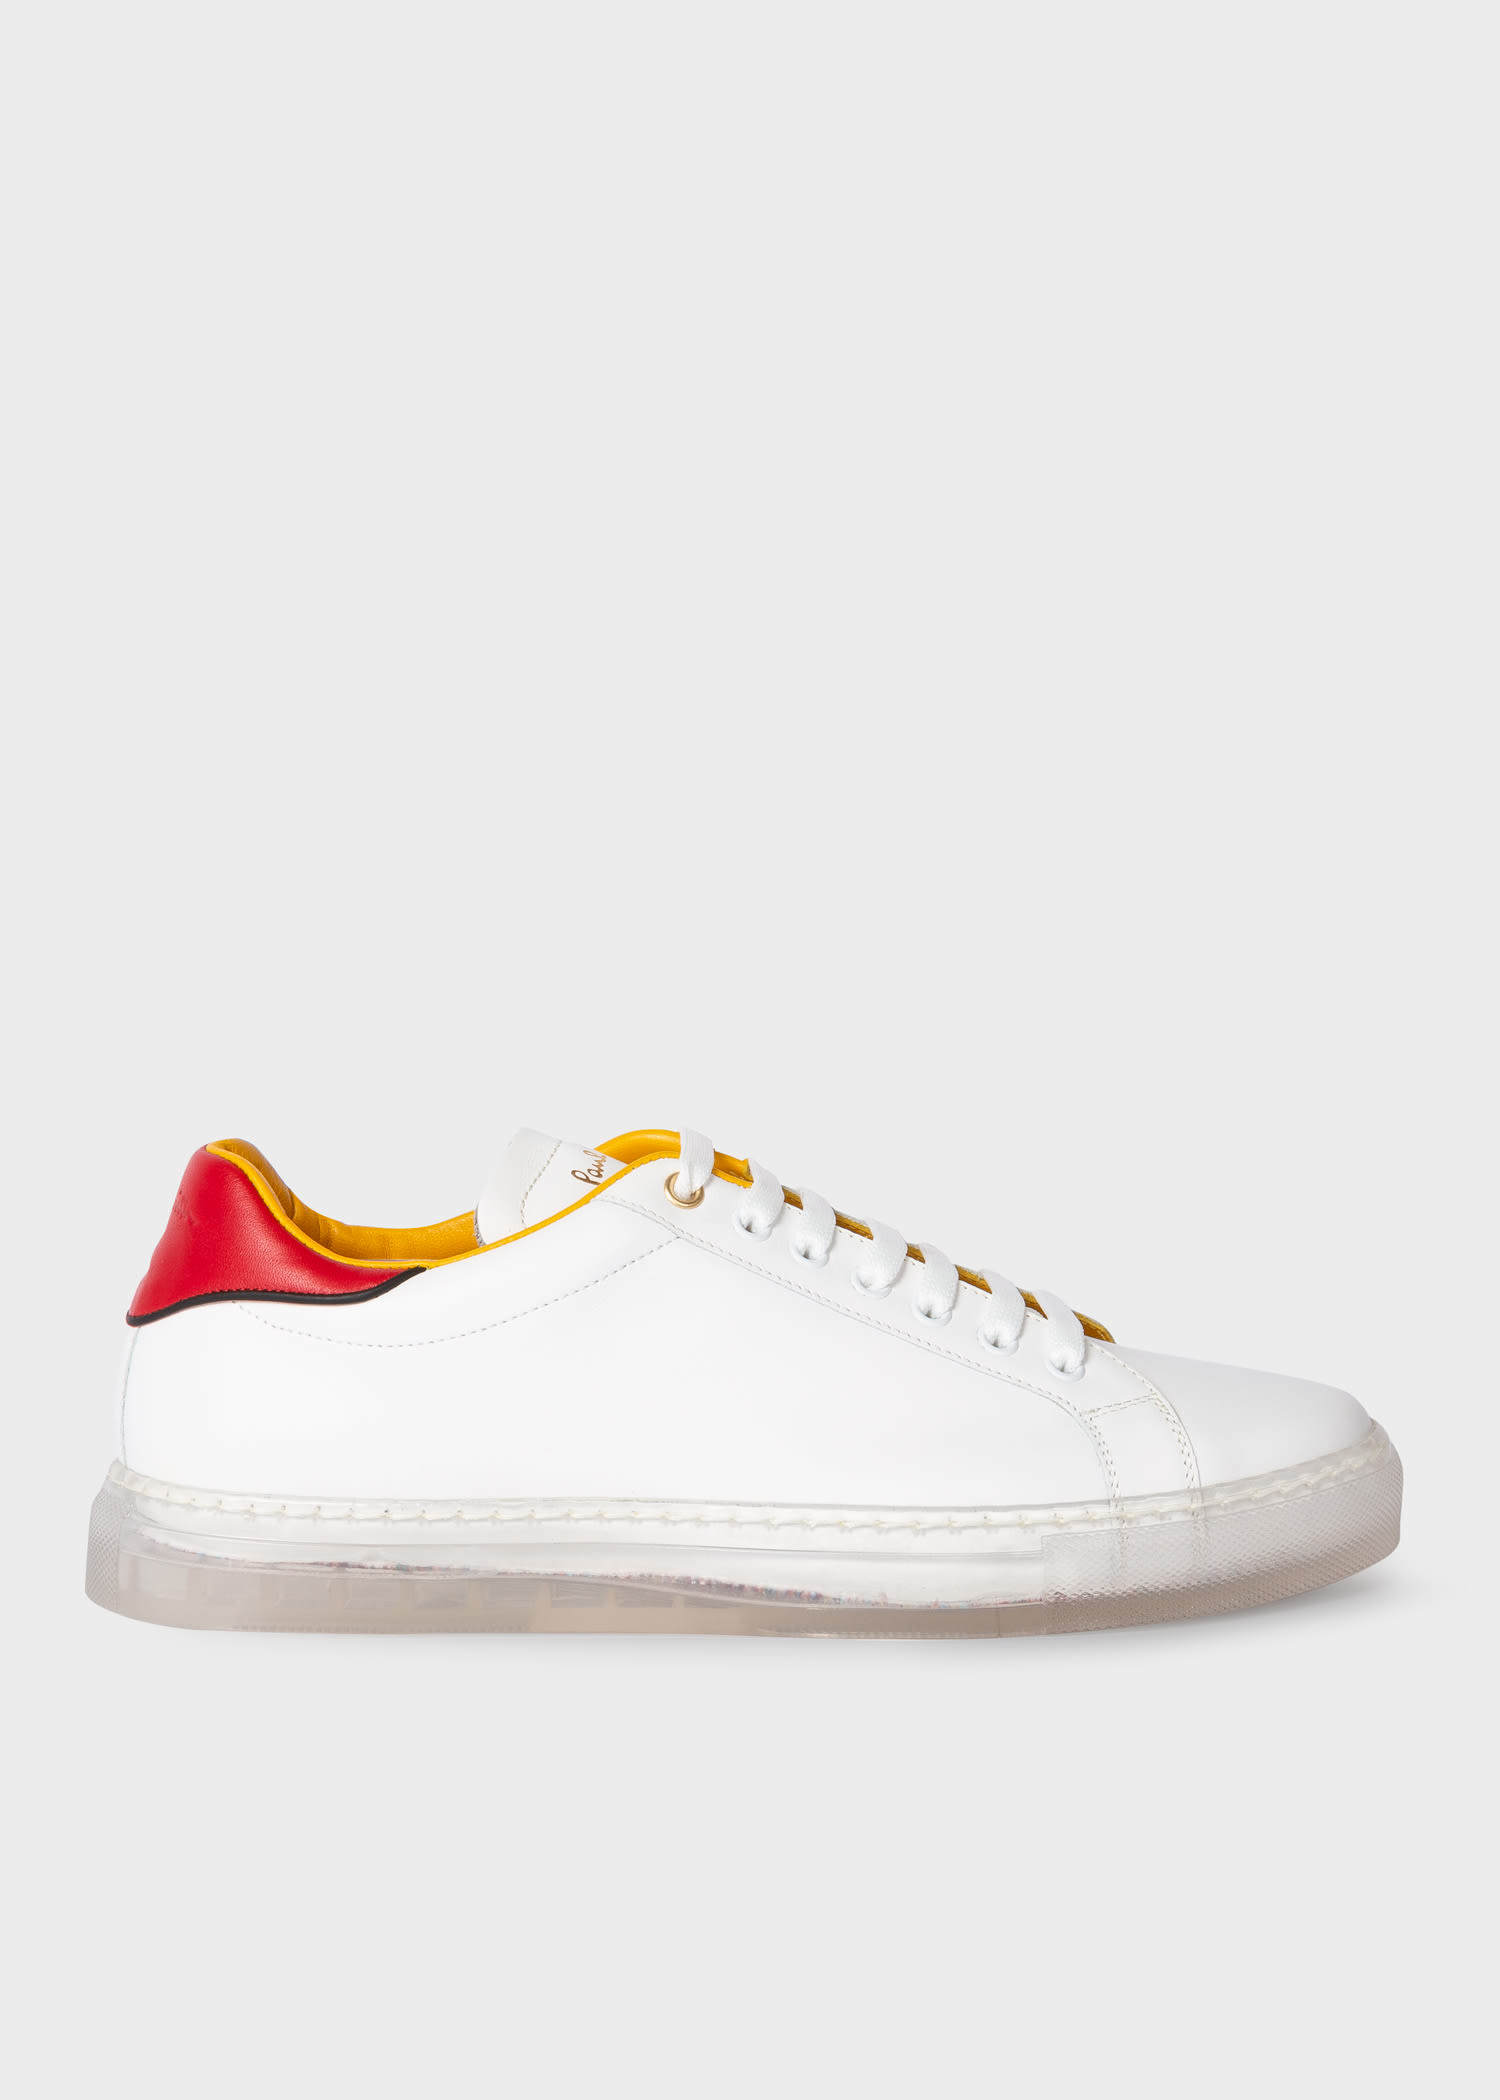 Men's Designer Trainers | White & Black Leather Trainers - Paul Smith